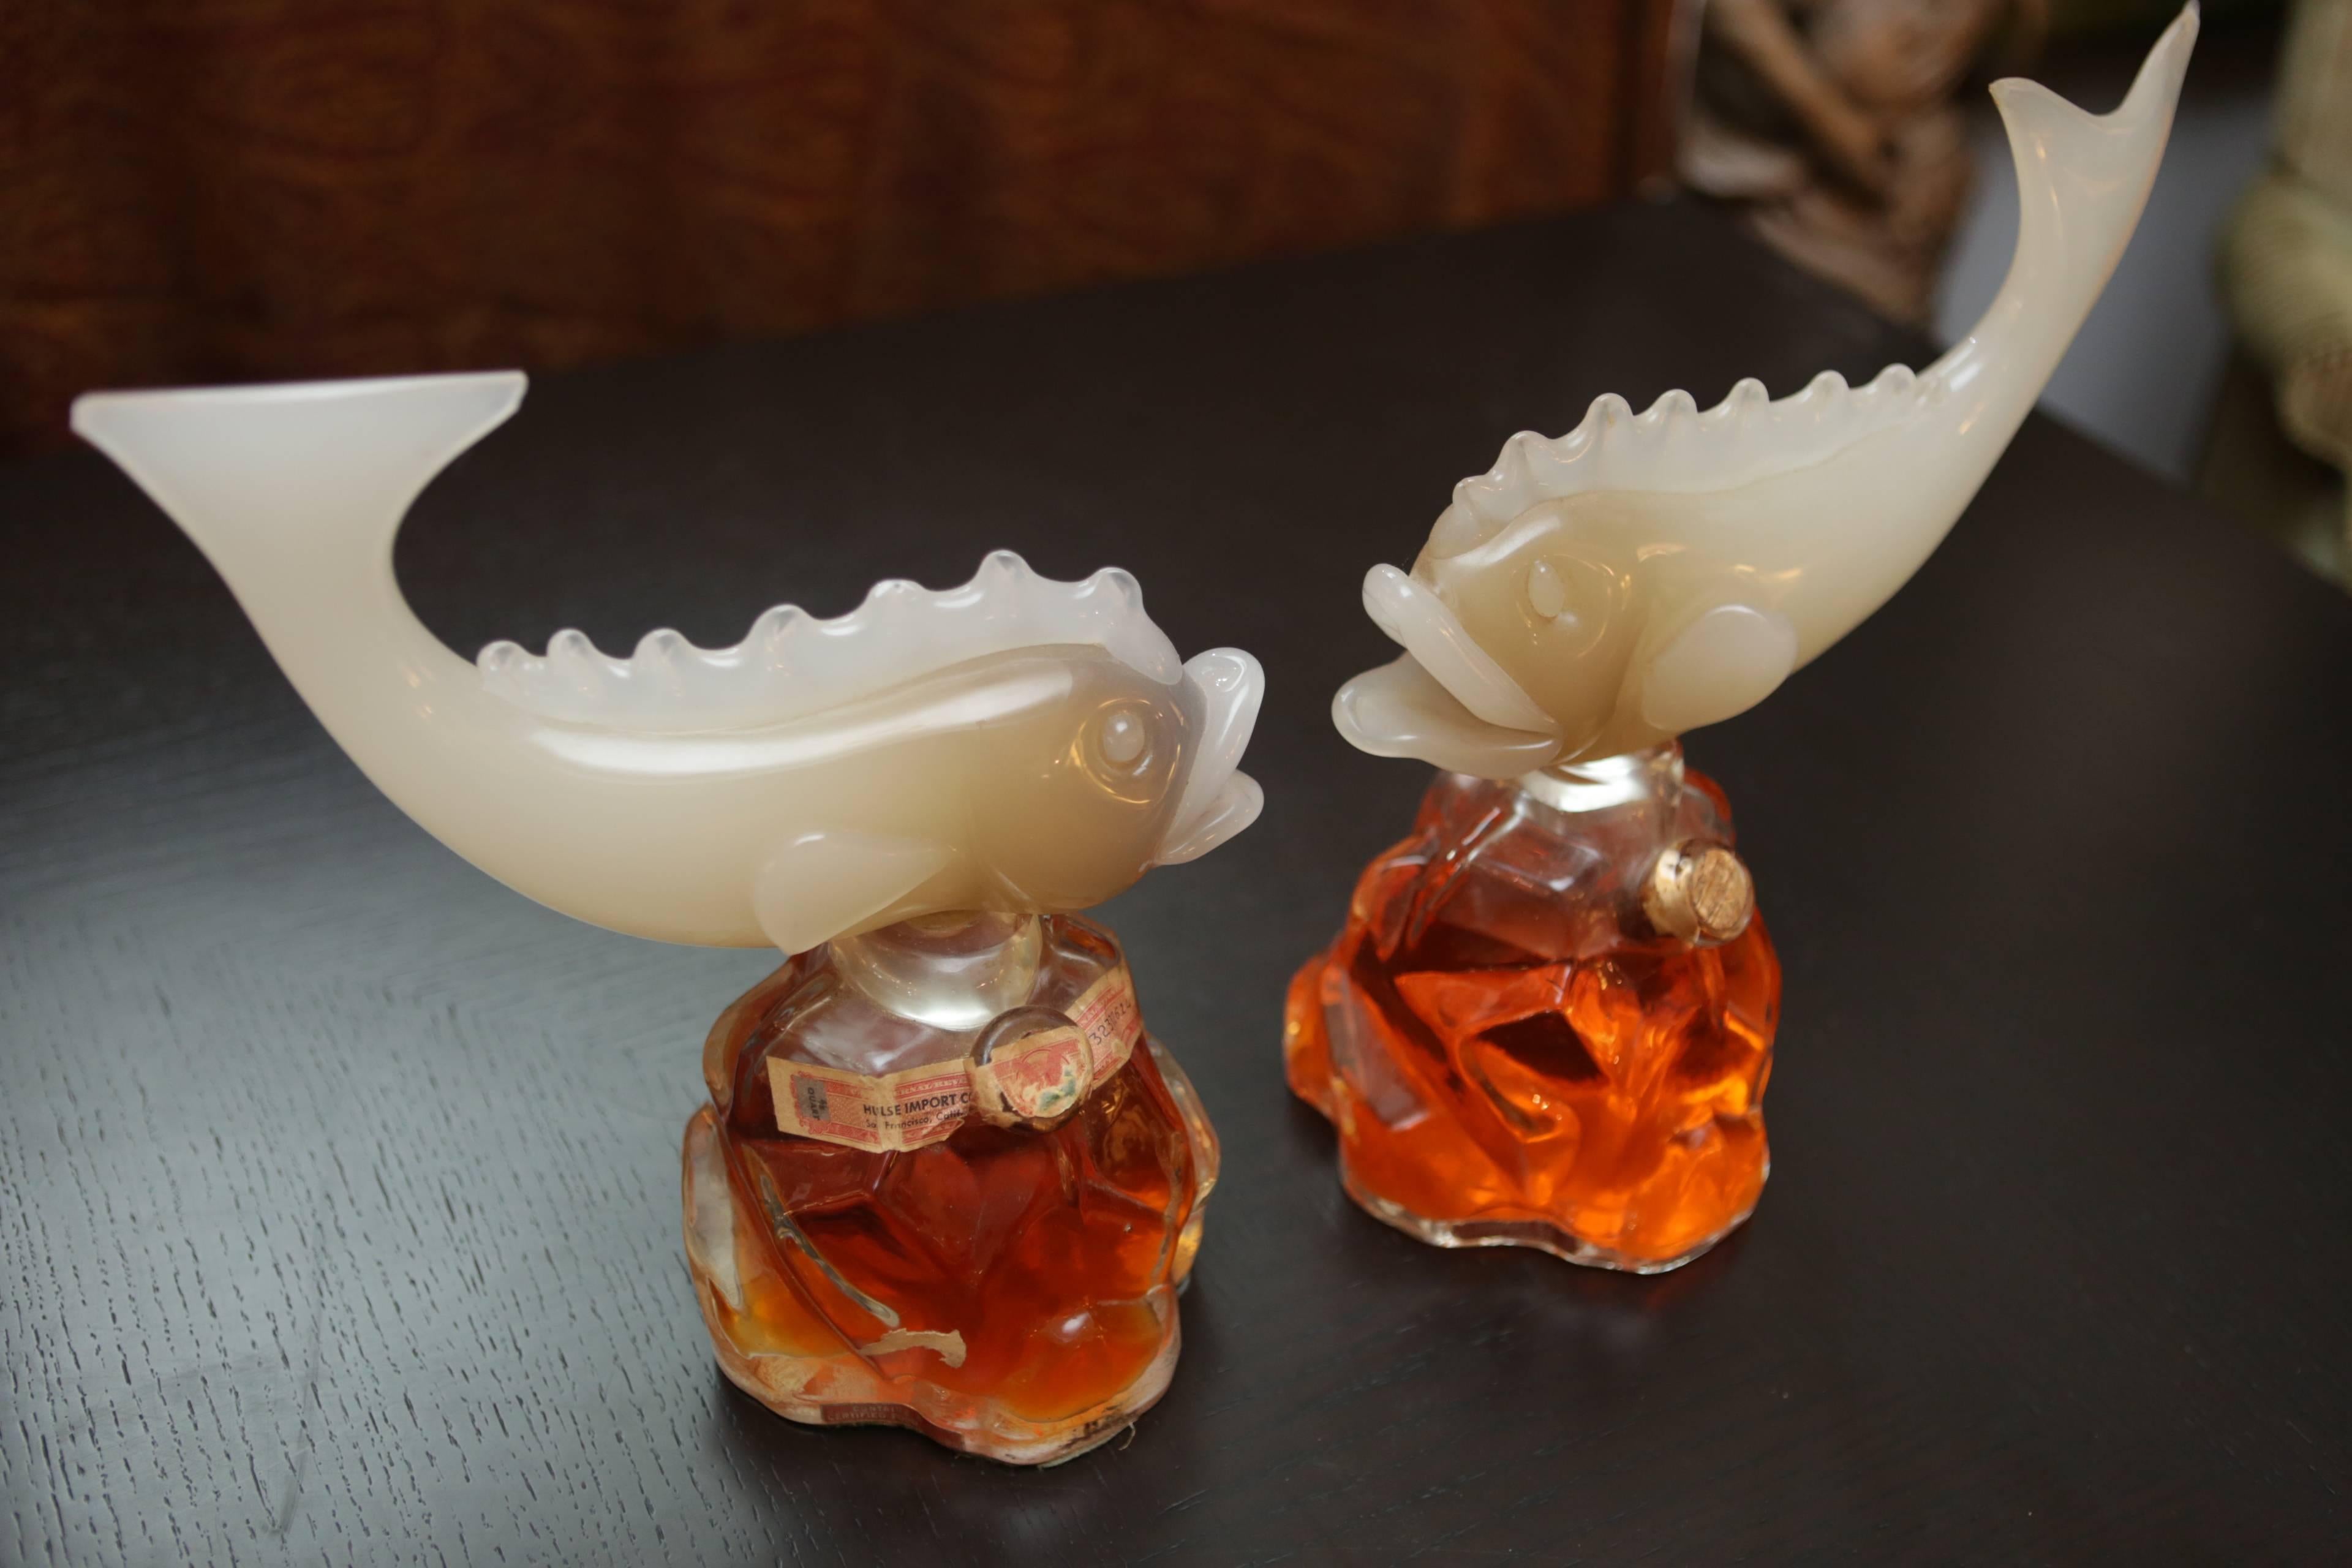 An unusual pair of Murano glass Italian fish decanters from the 1920s. Has original customs sticker over one of the corks from San Francisco. Contains orange-colored liquid, most likely a brandy or liqueur.

Both fish are uniquely handmade, each